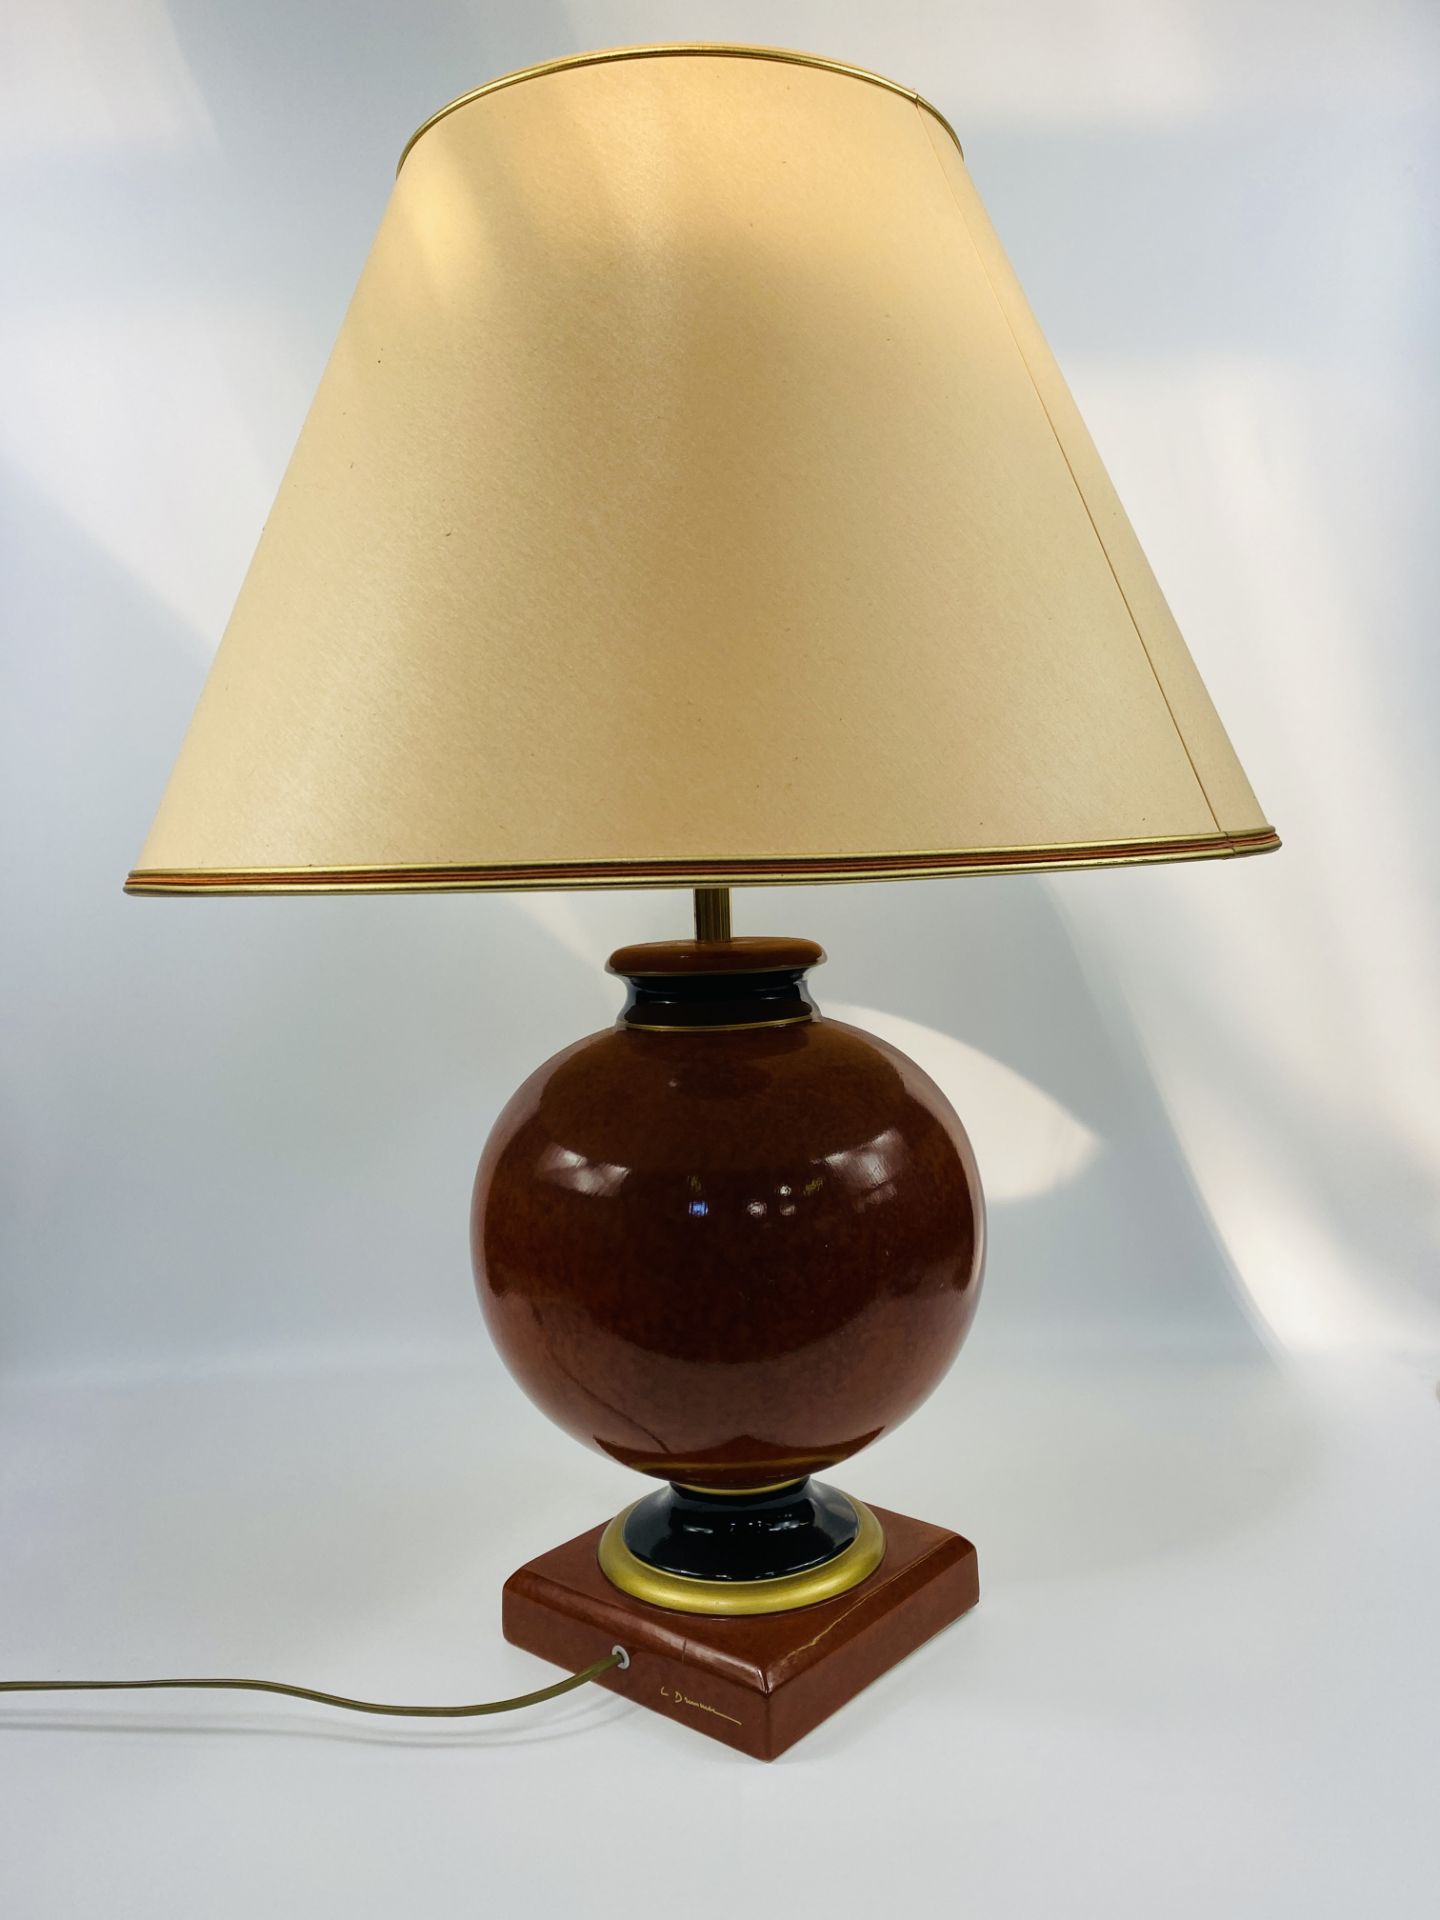 Pair of ceramic table lamps - Image 5 of 5